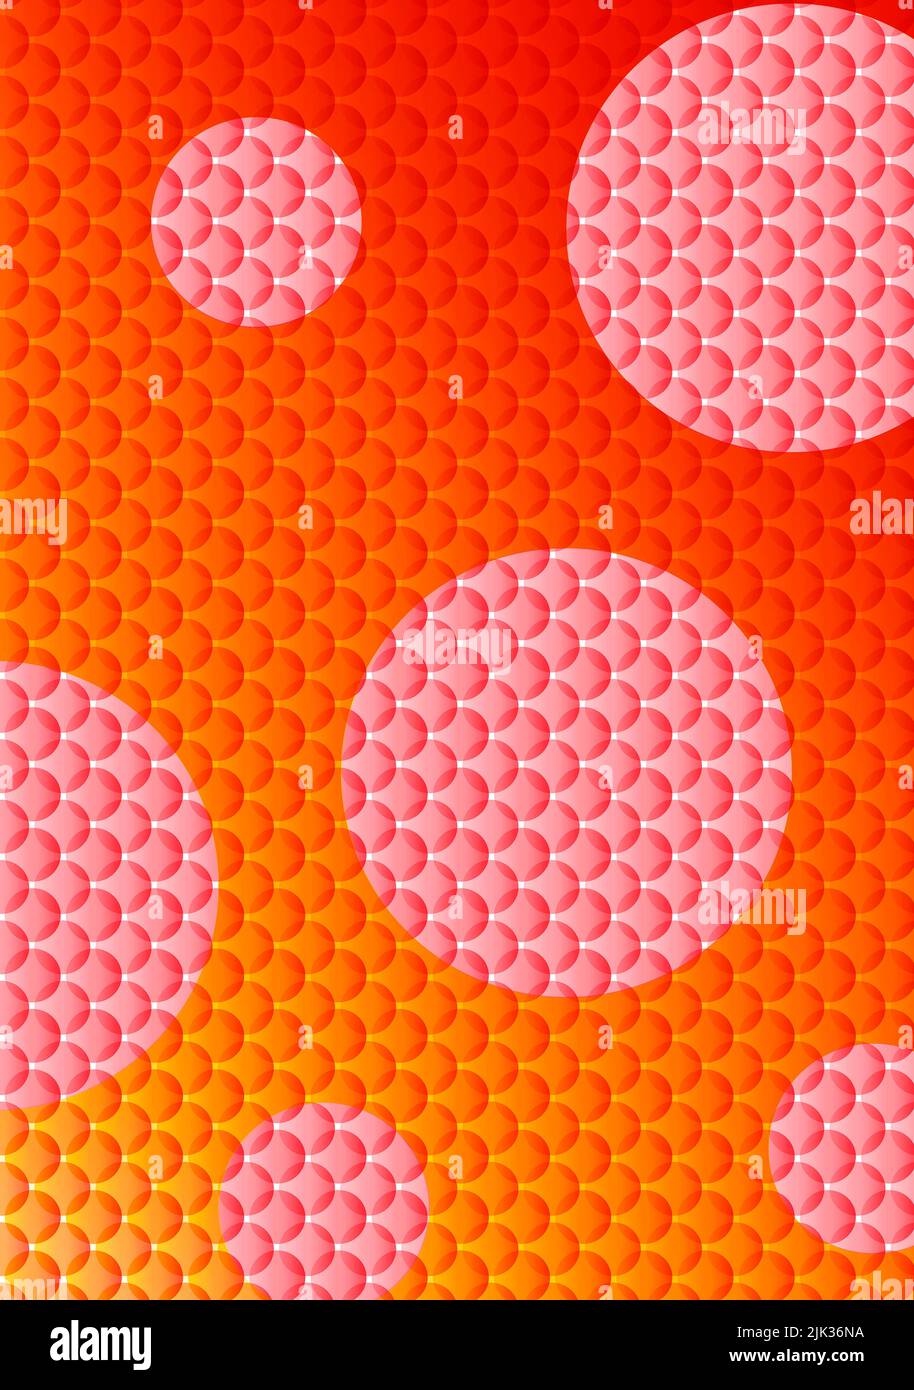 Abstract Geometry pattern red background for design - stock illustration Stock Photo